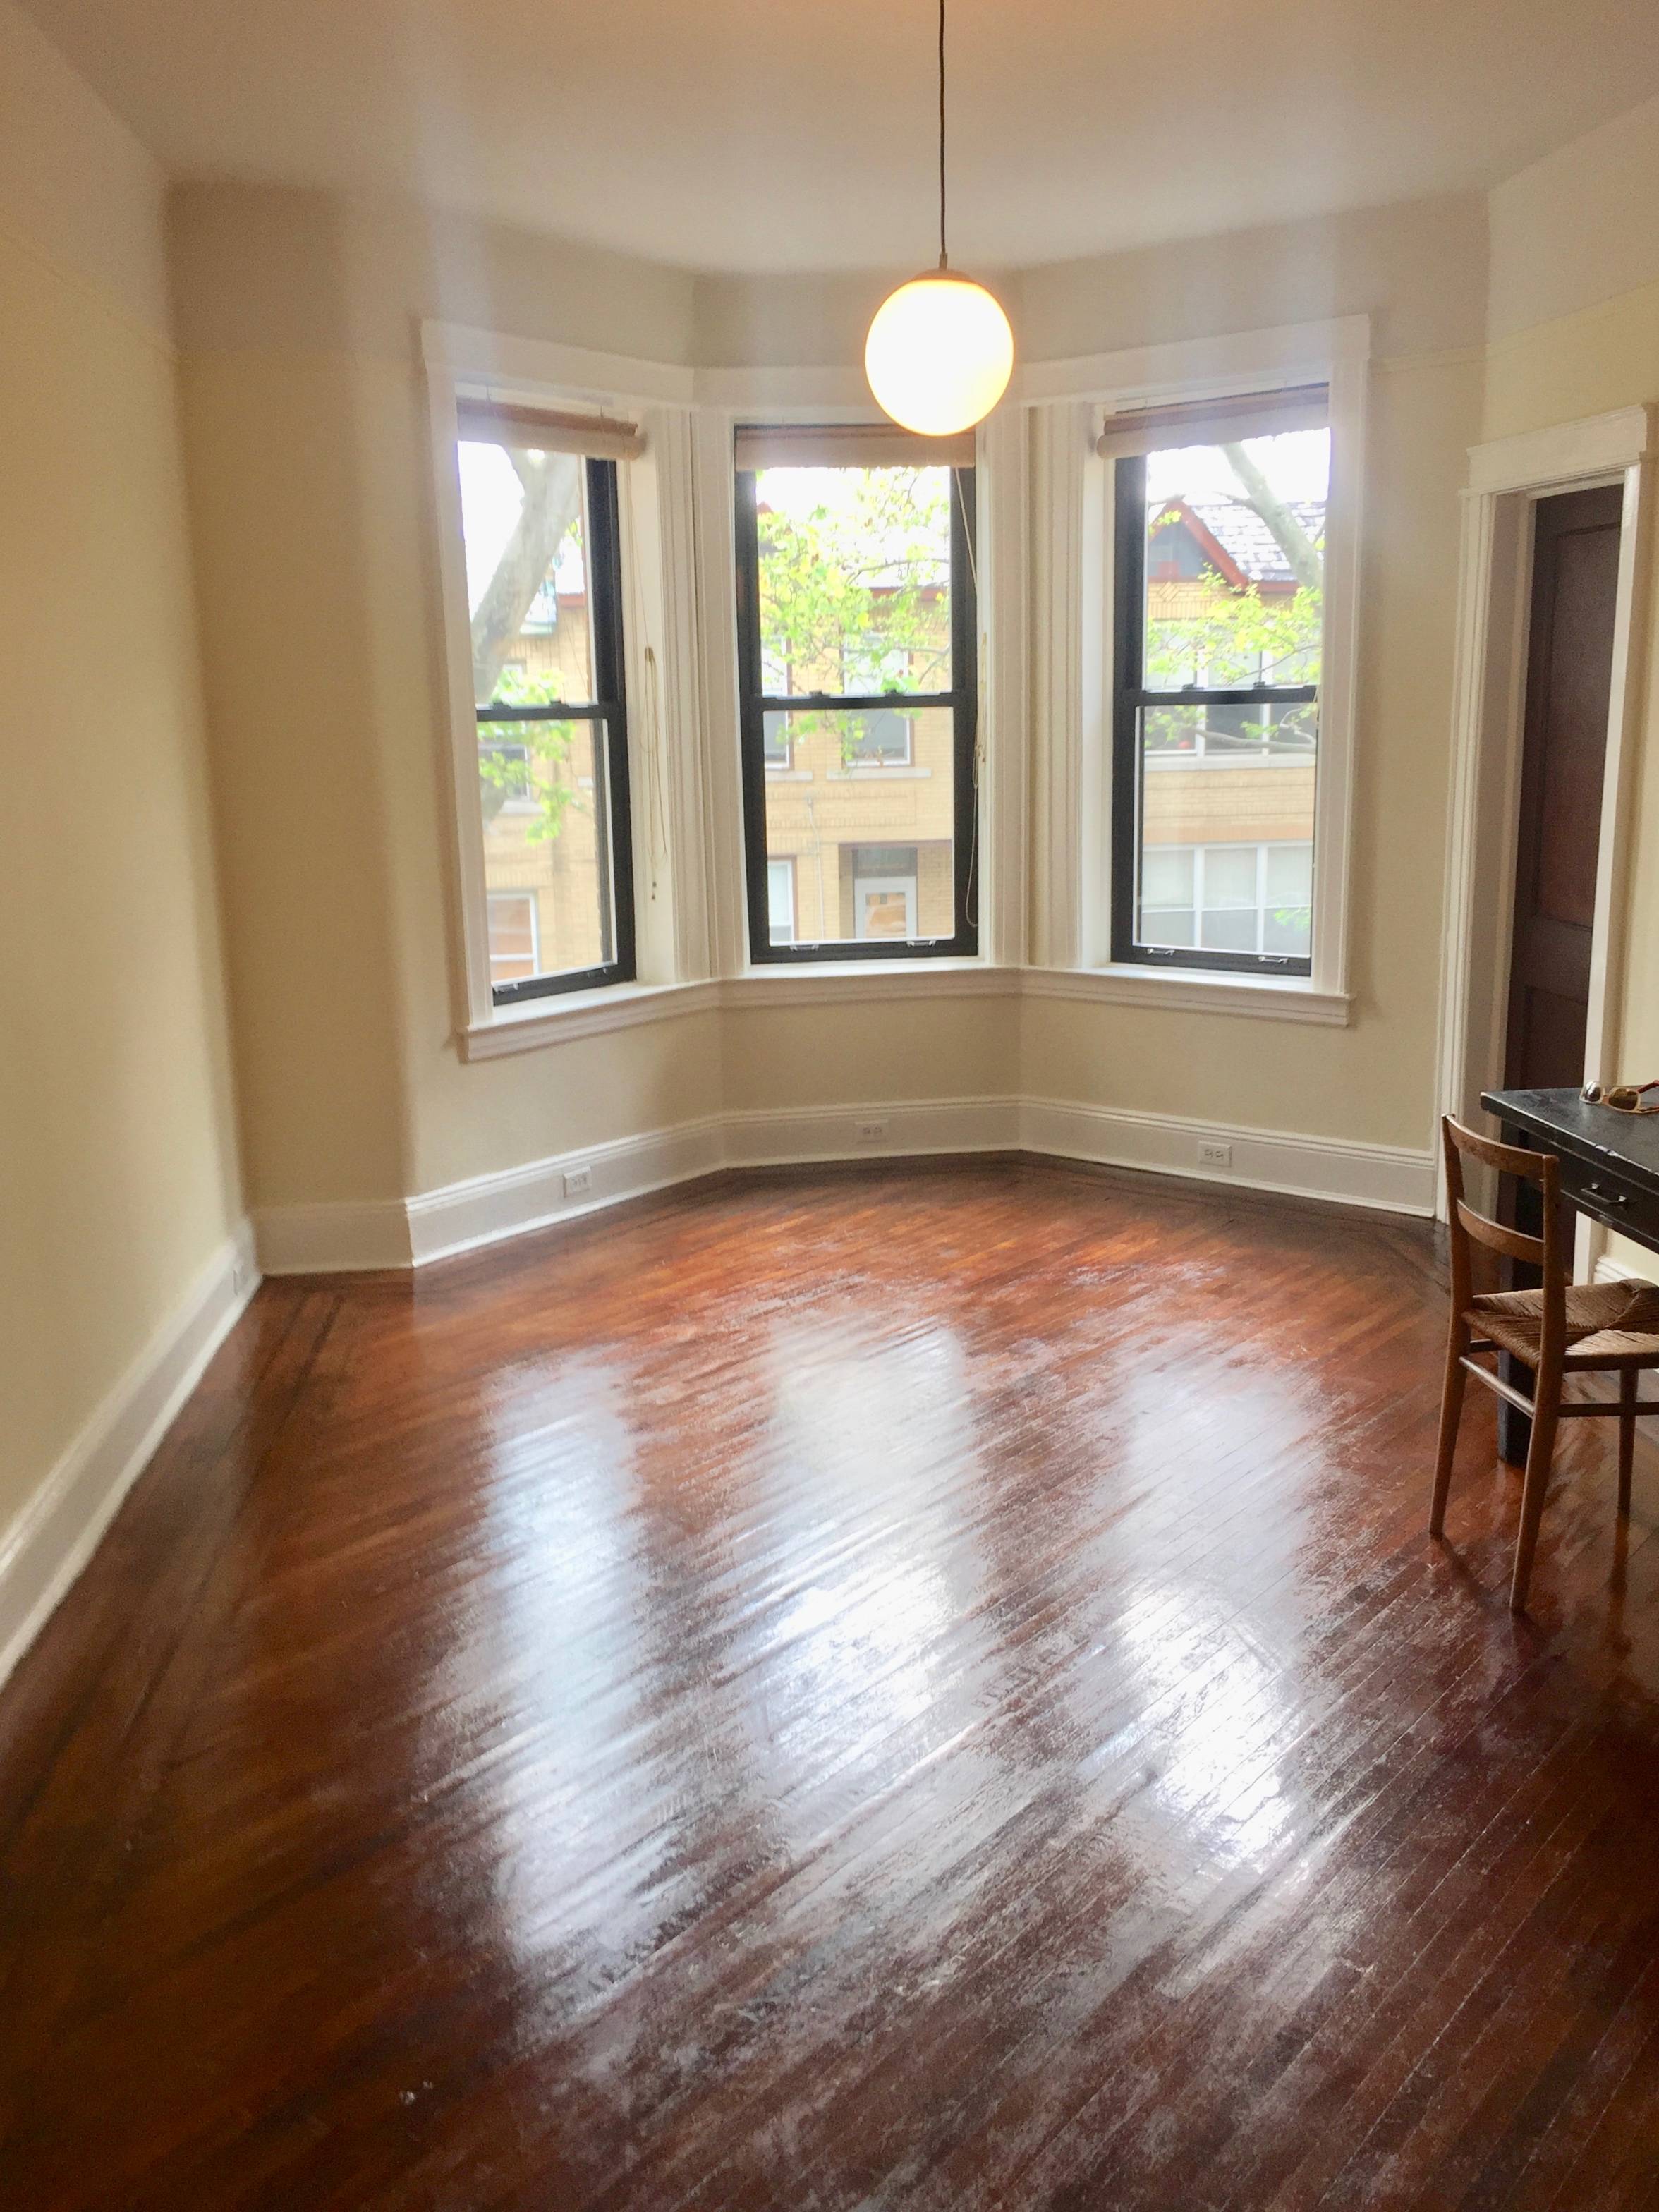 Tastefully renovated full floor apartment available in a two unit turn of the century townhome.